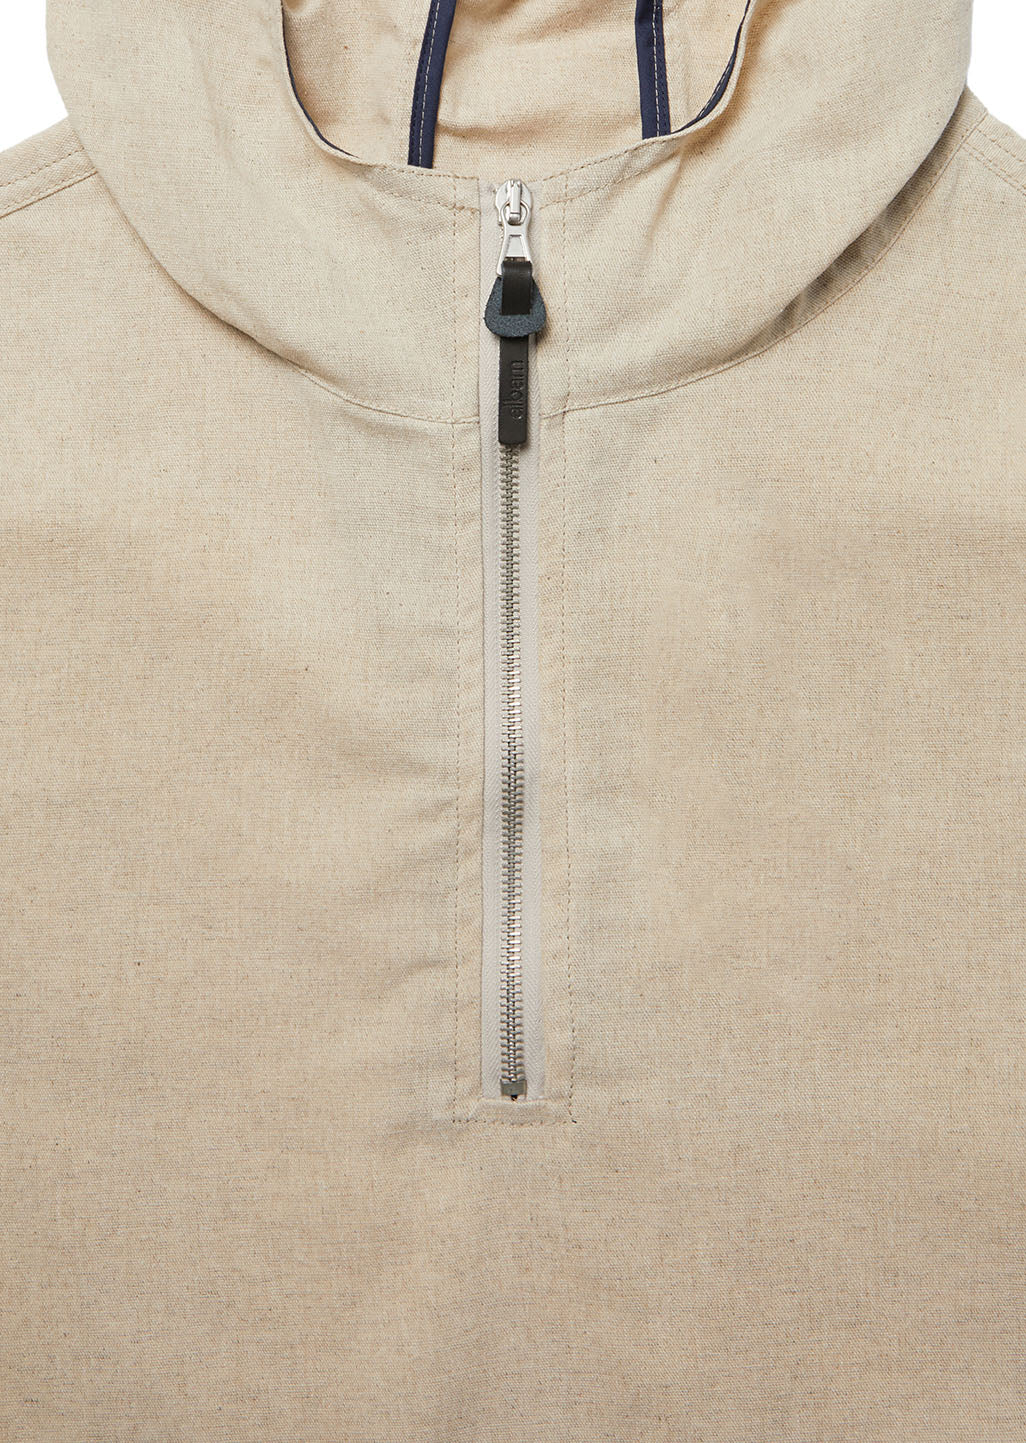 Flax Smock in Stone